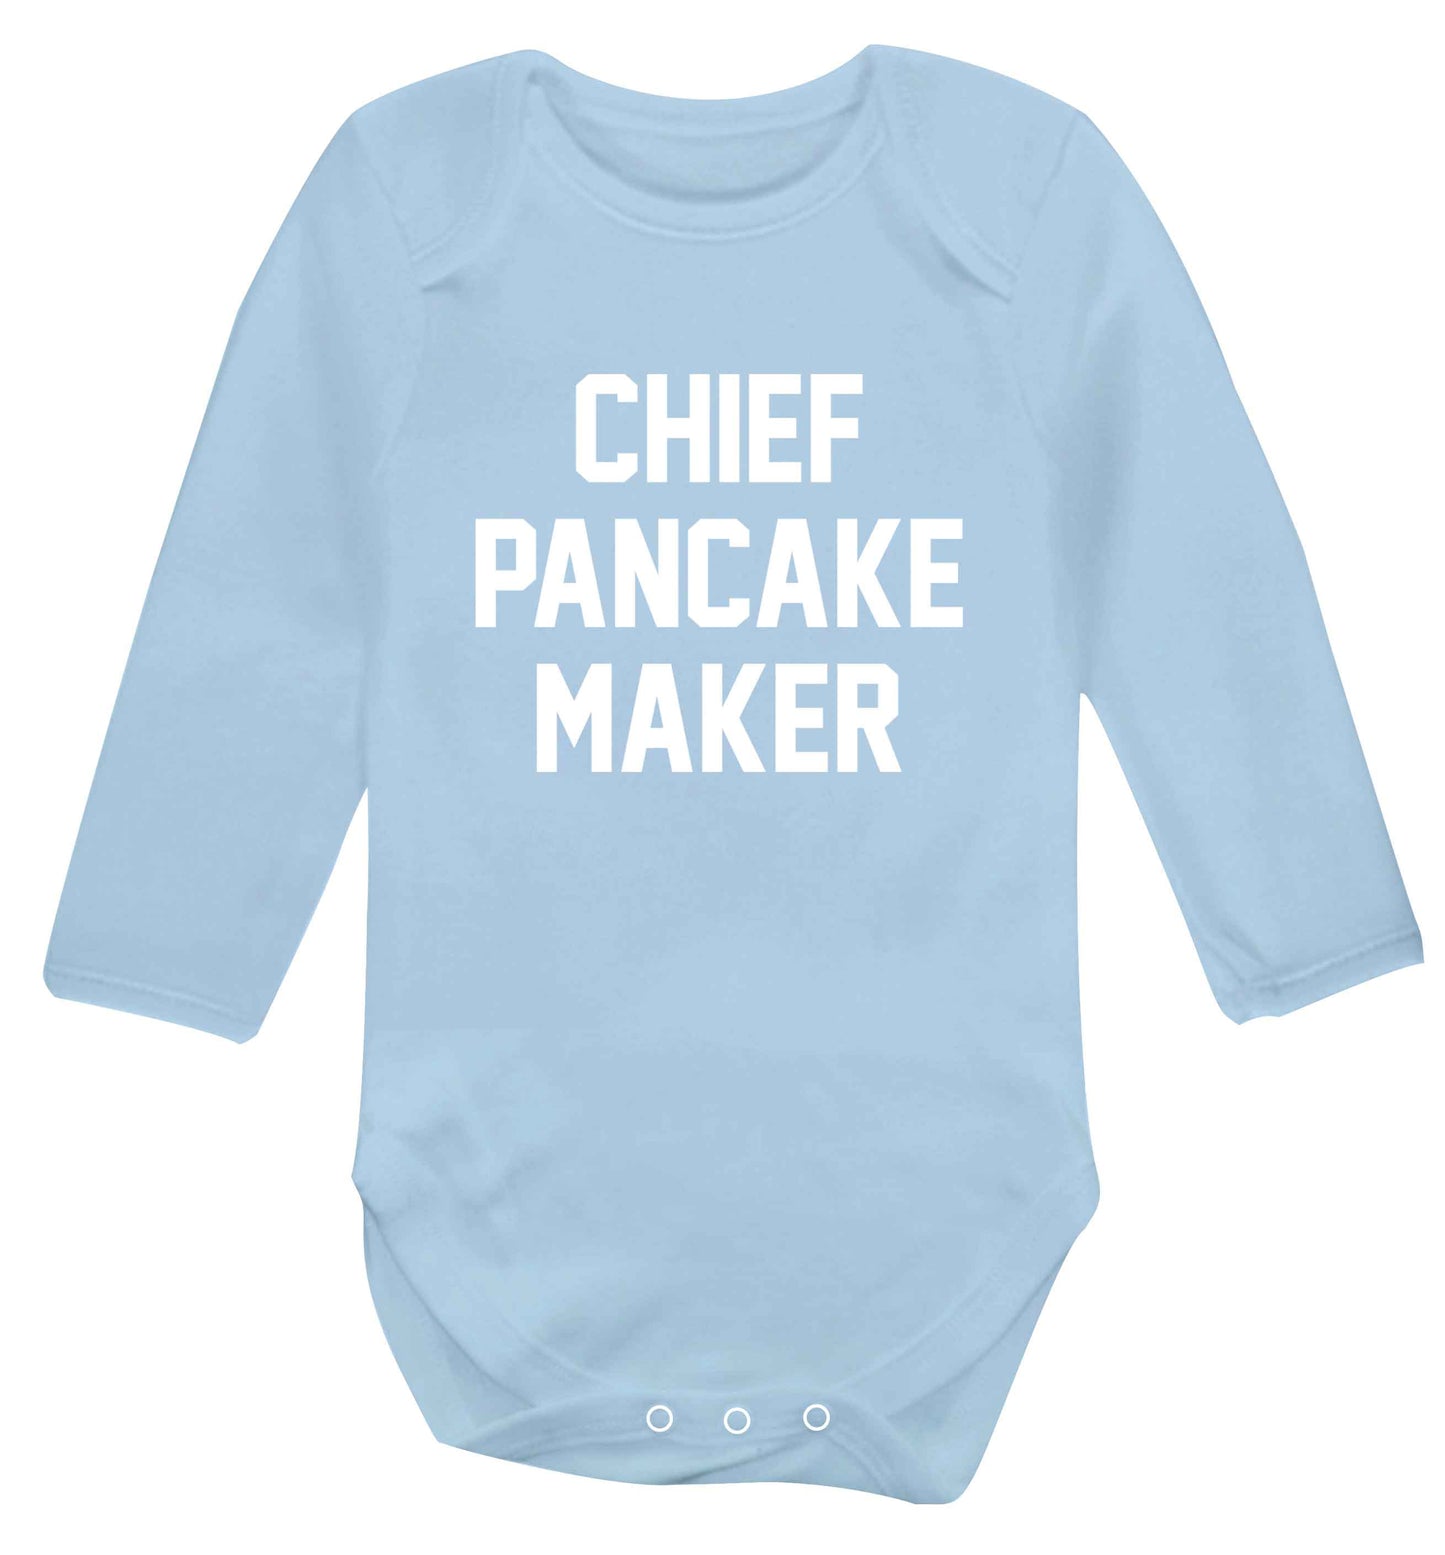 Chief pancake maker baby vest long sleeved pale blue 6-12 months